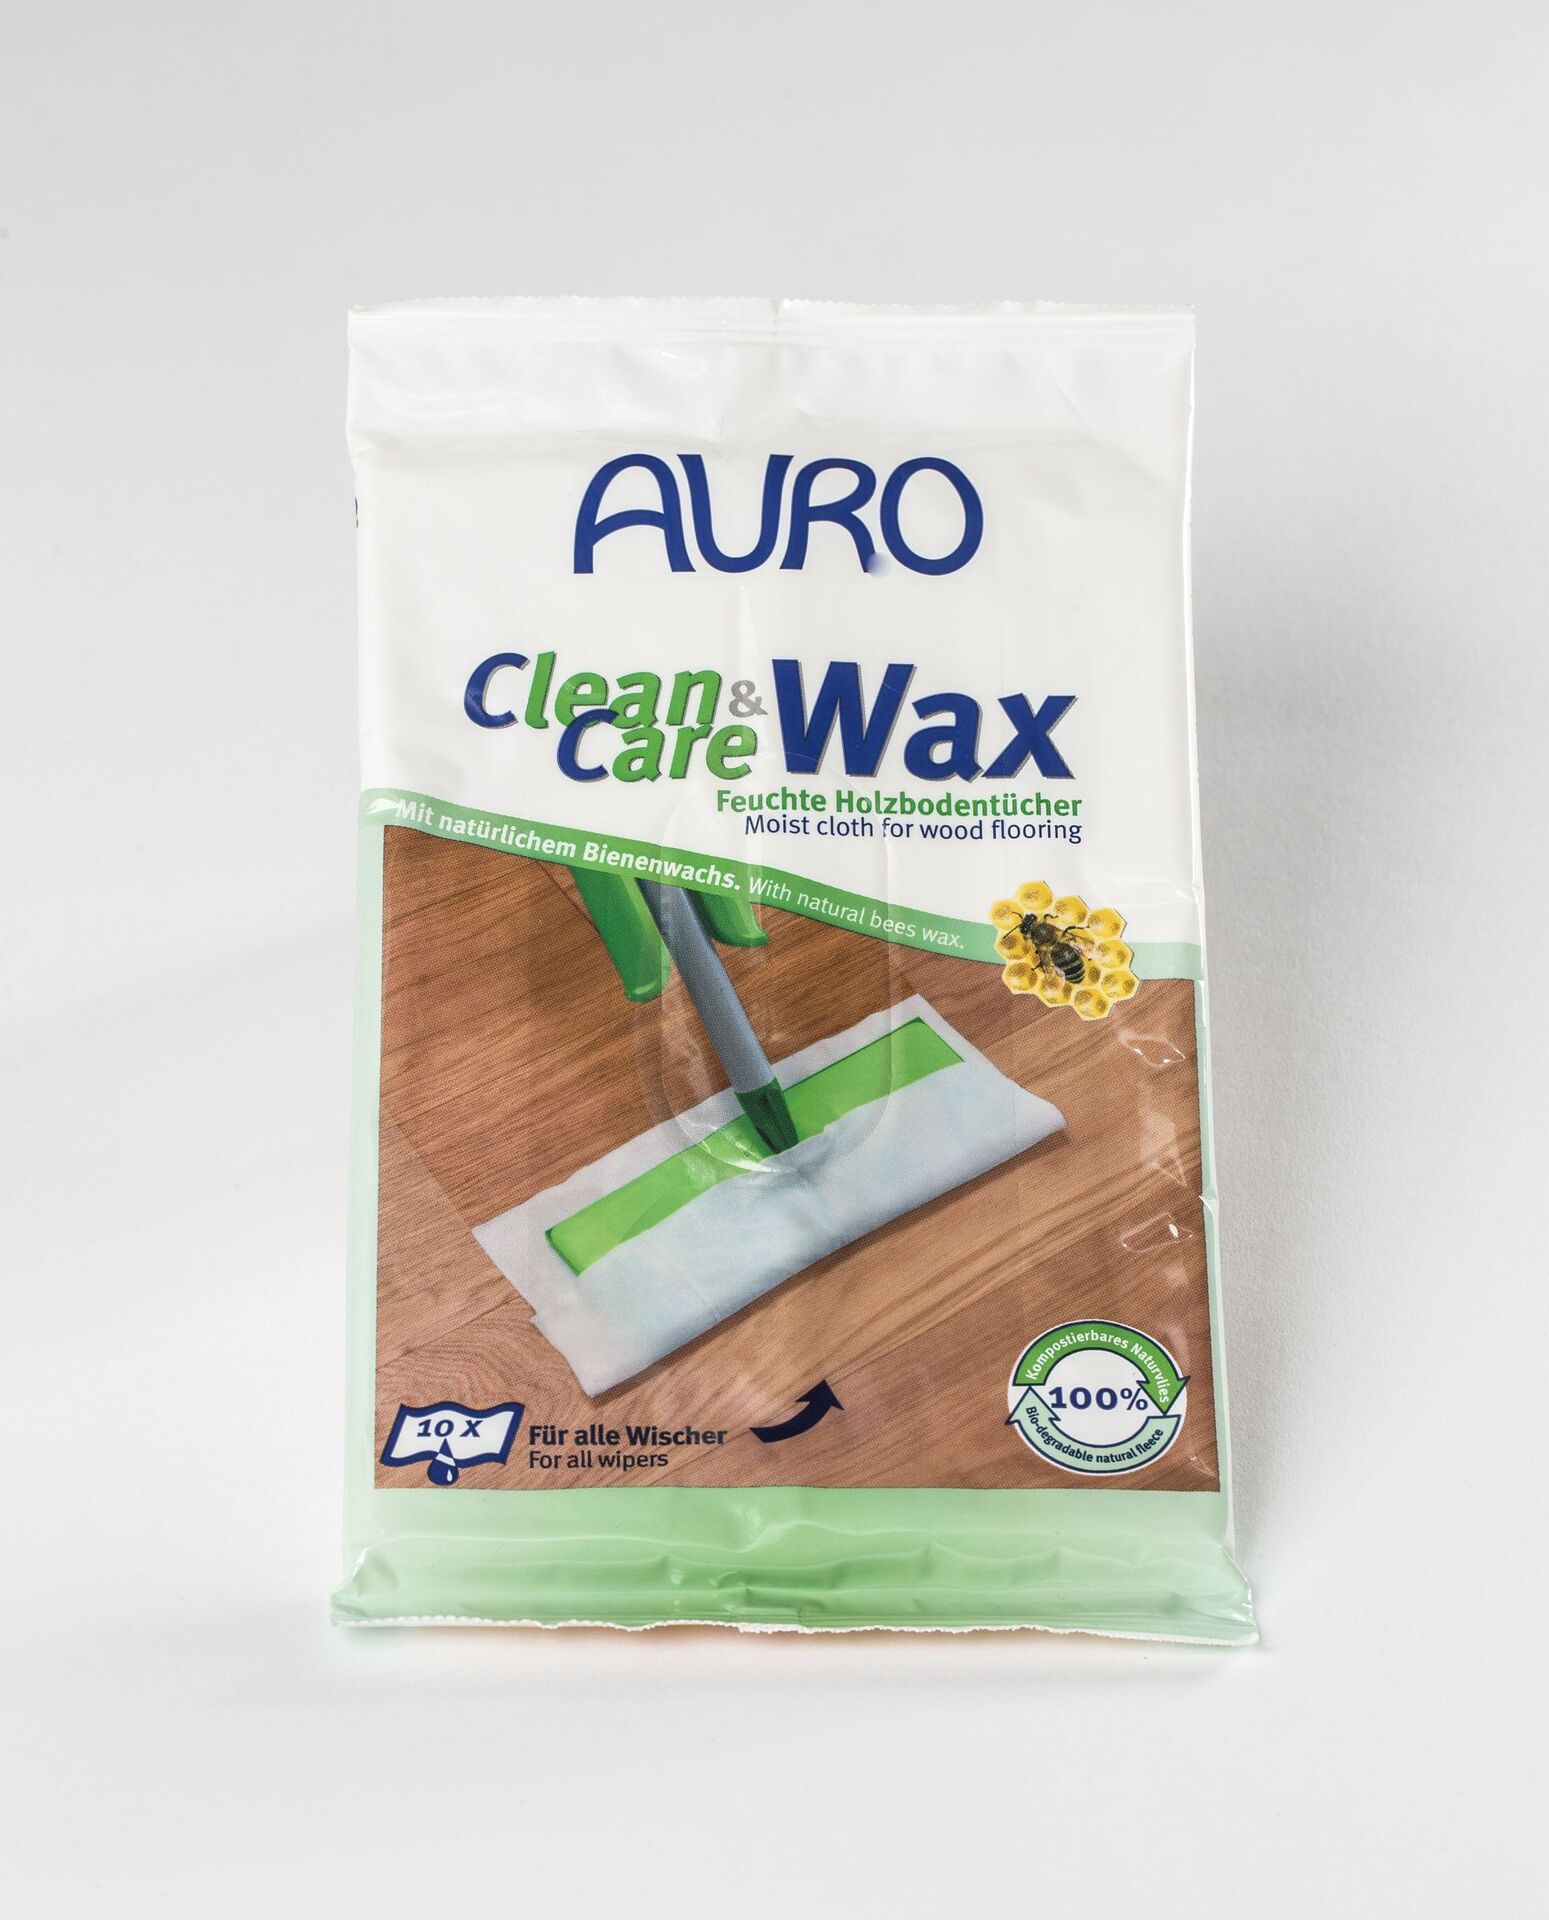 auro clean & care wax - feuchte holzbodentÃ¼cher